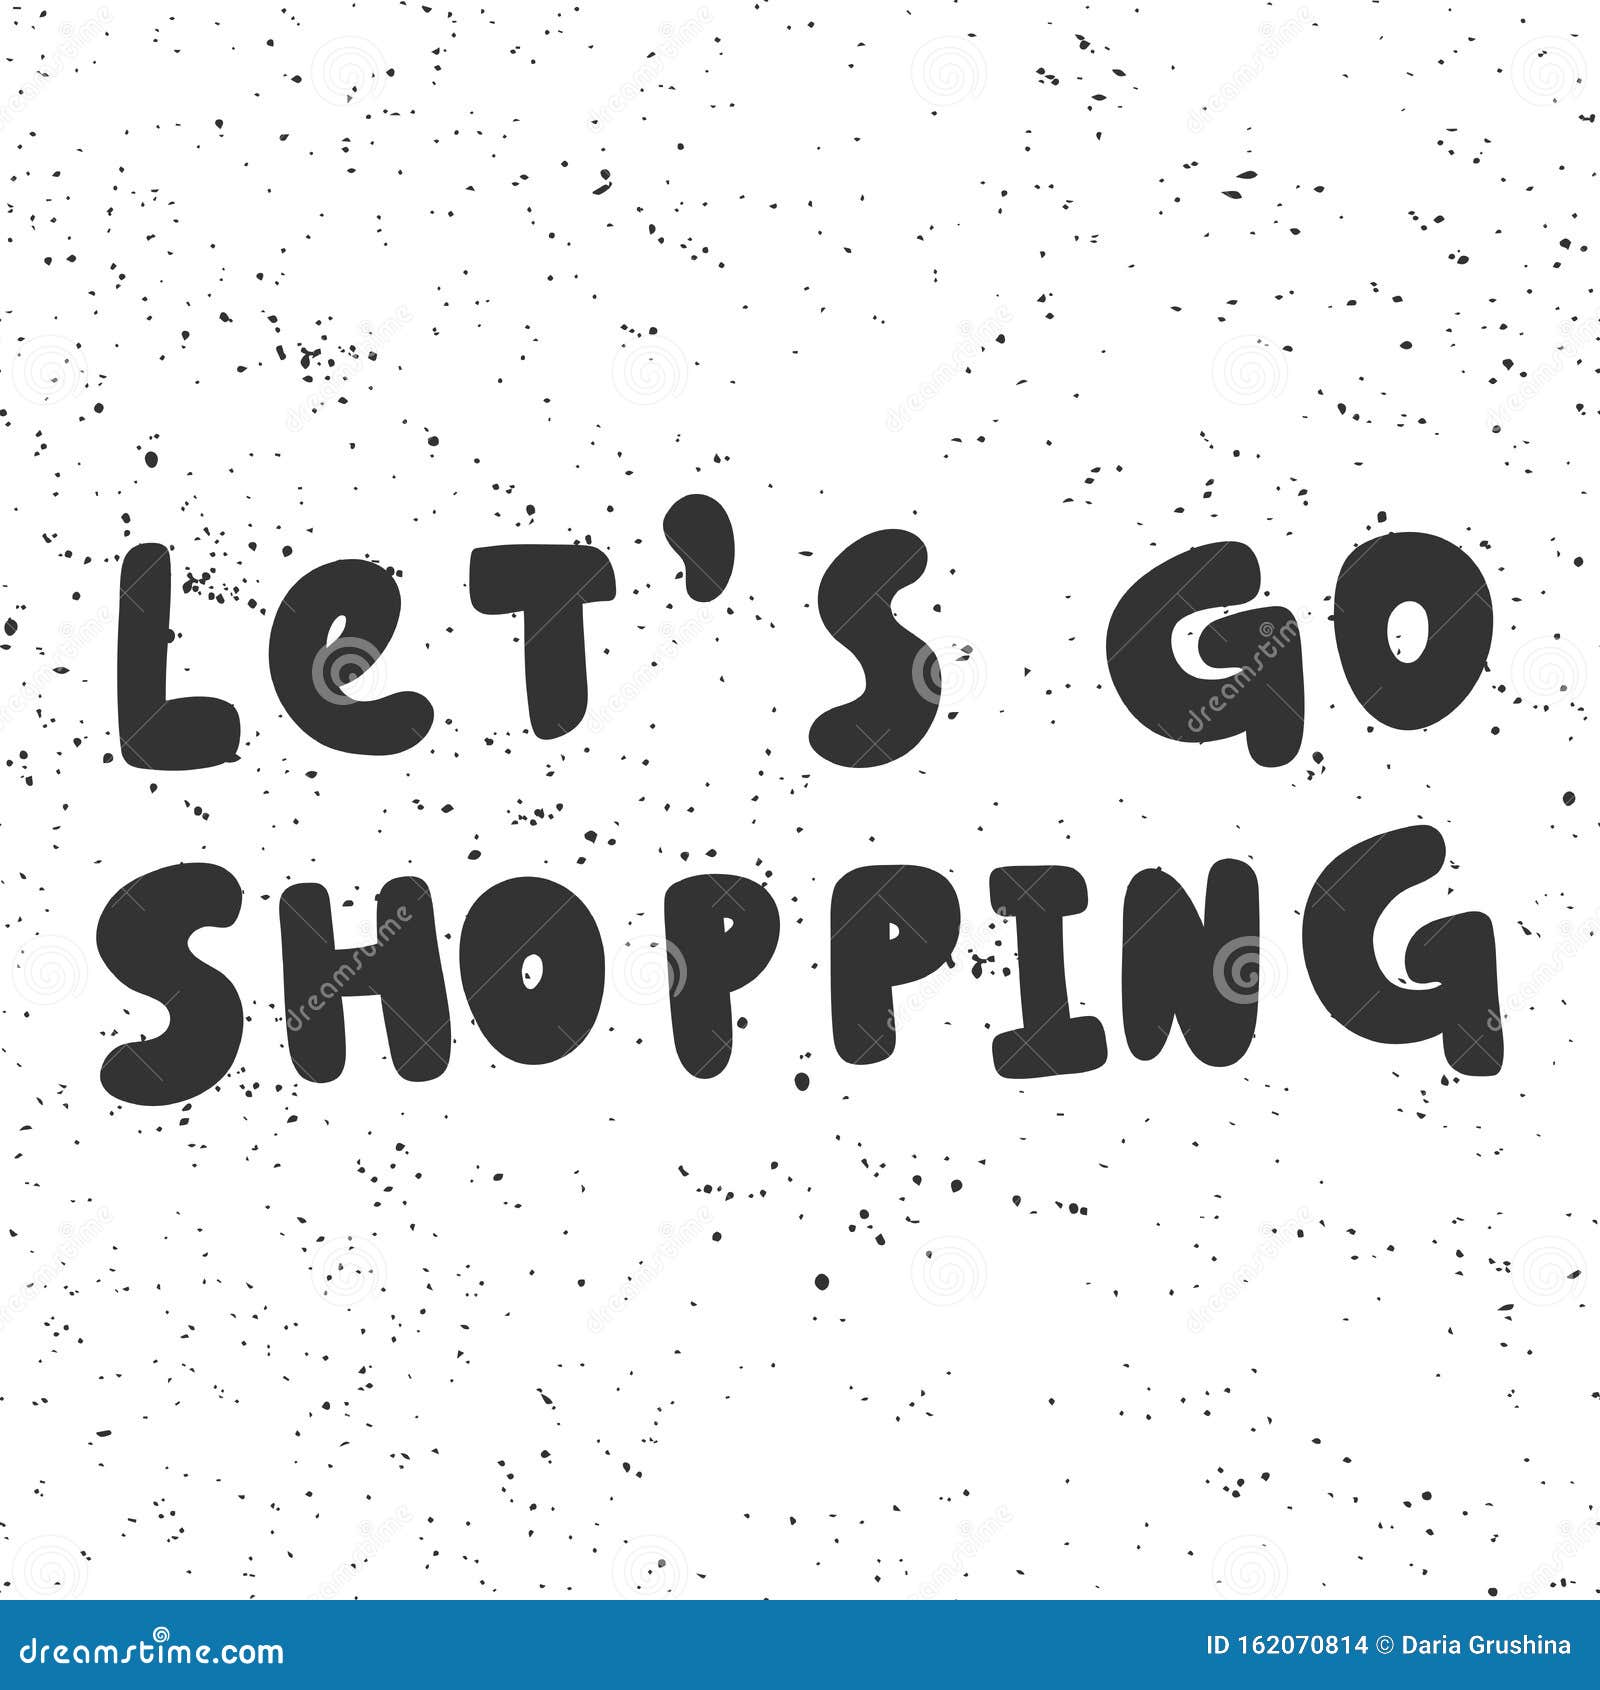 Let s go to the shop. Let’s go shopping картинки. Lets go shopping. Let`s go shopping. Подготовить проект Let s go shopping.